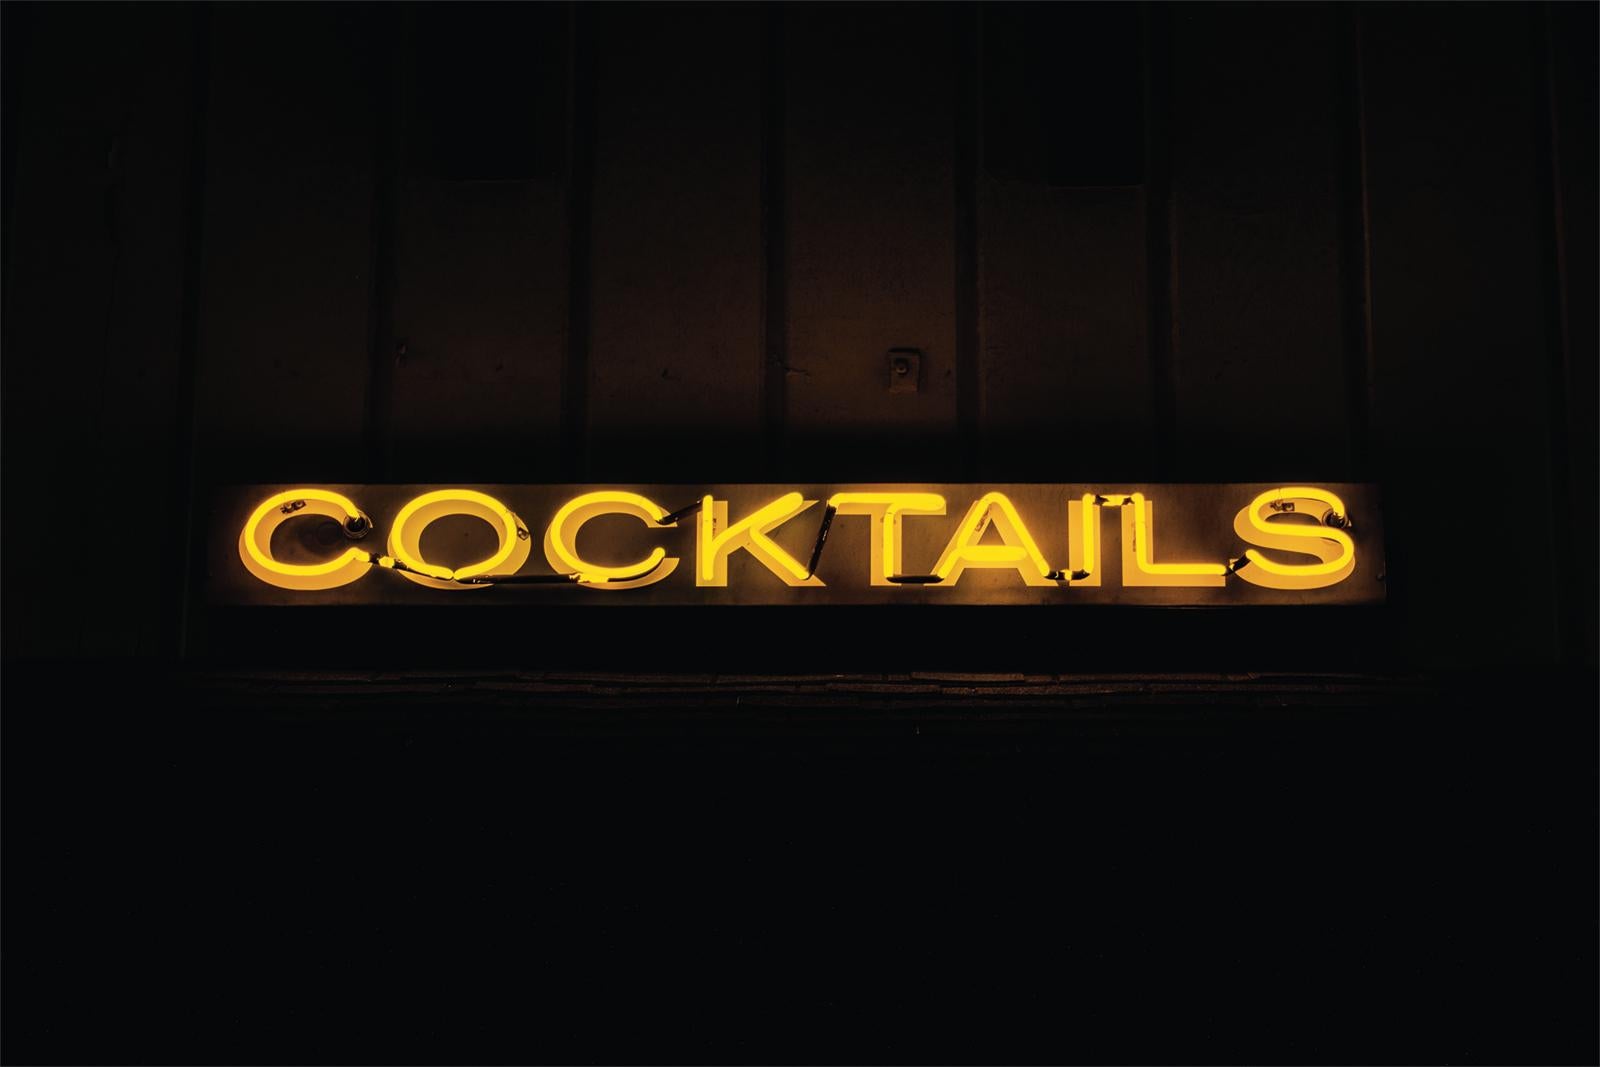 "Cocktails" Photography 23" x 32" inch Edition of 10 by Oleg Char